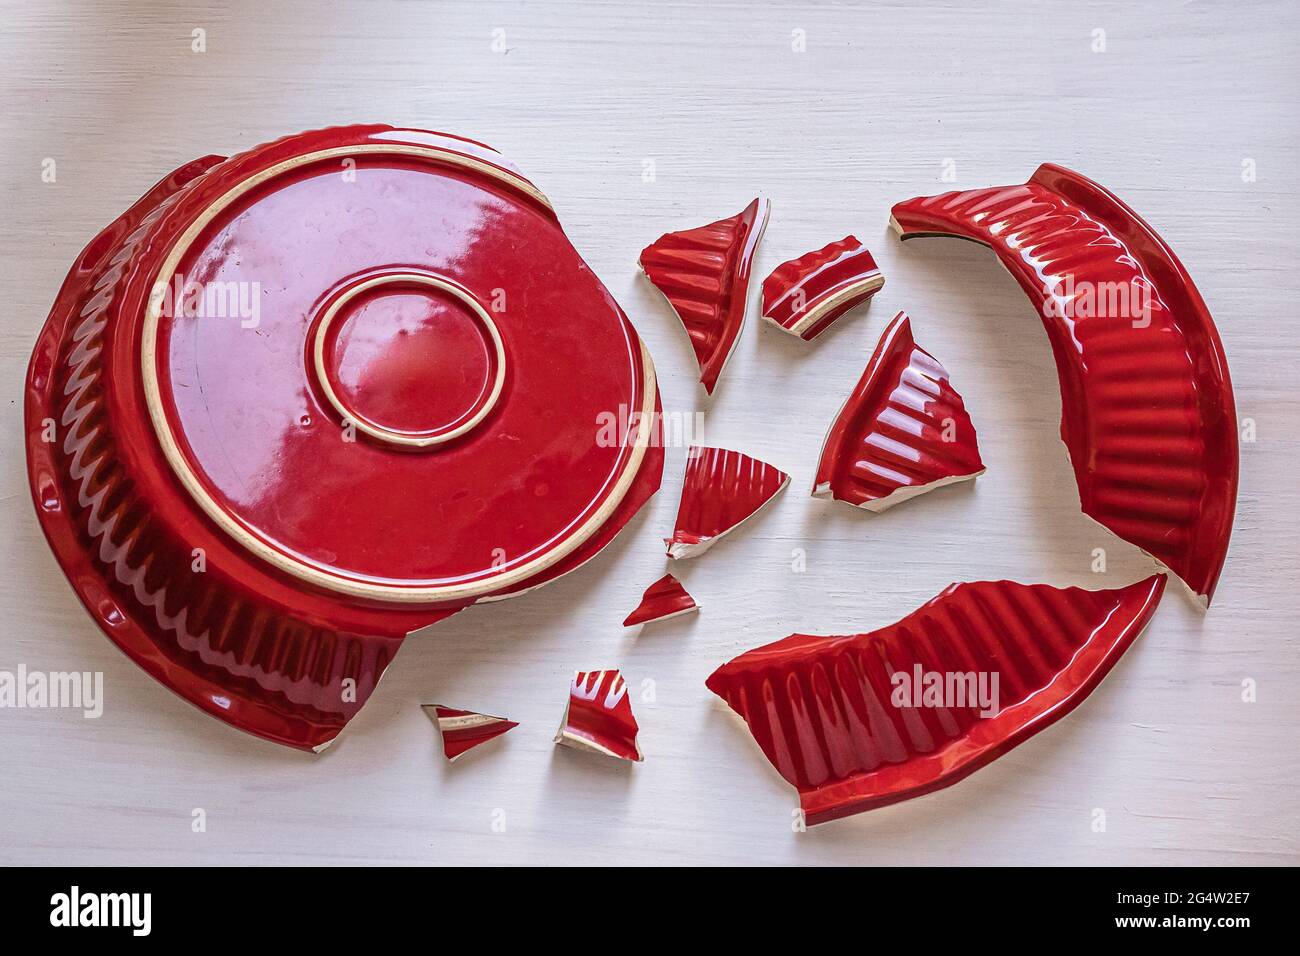 shards of broken red dishes Stock Photo